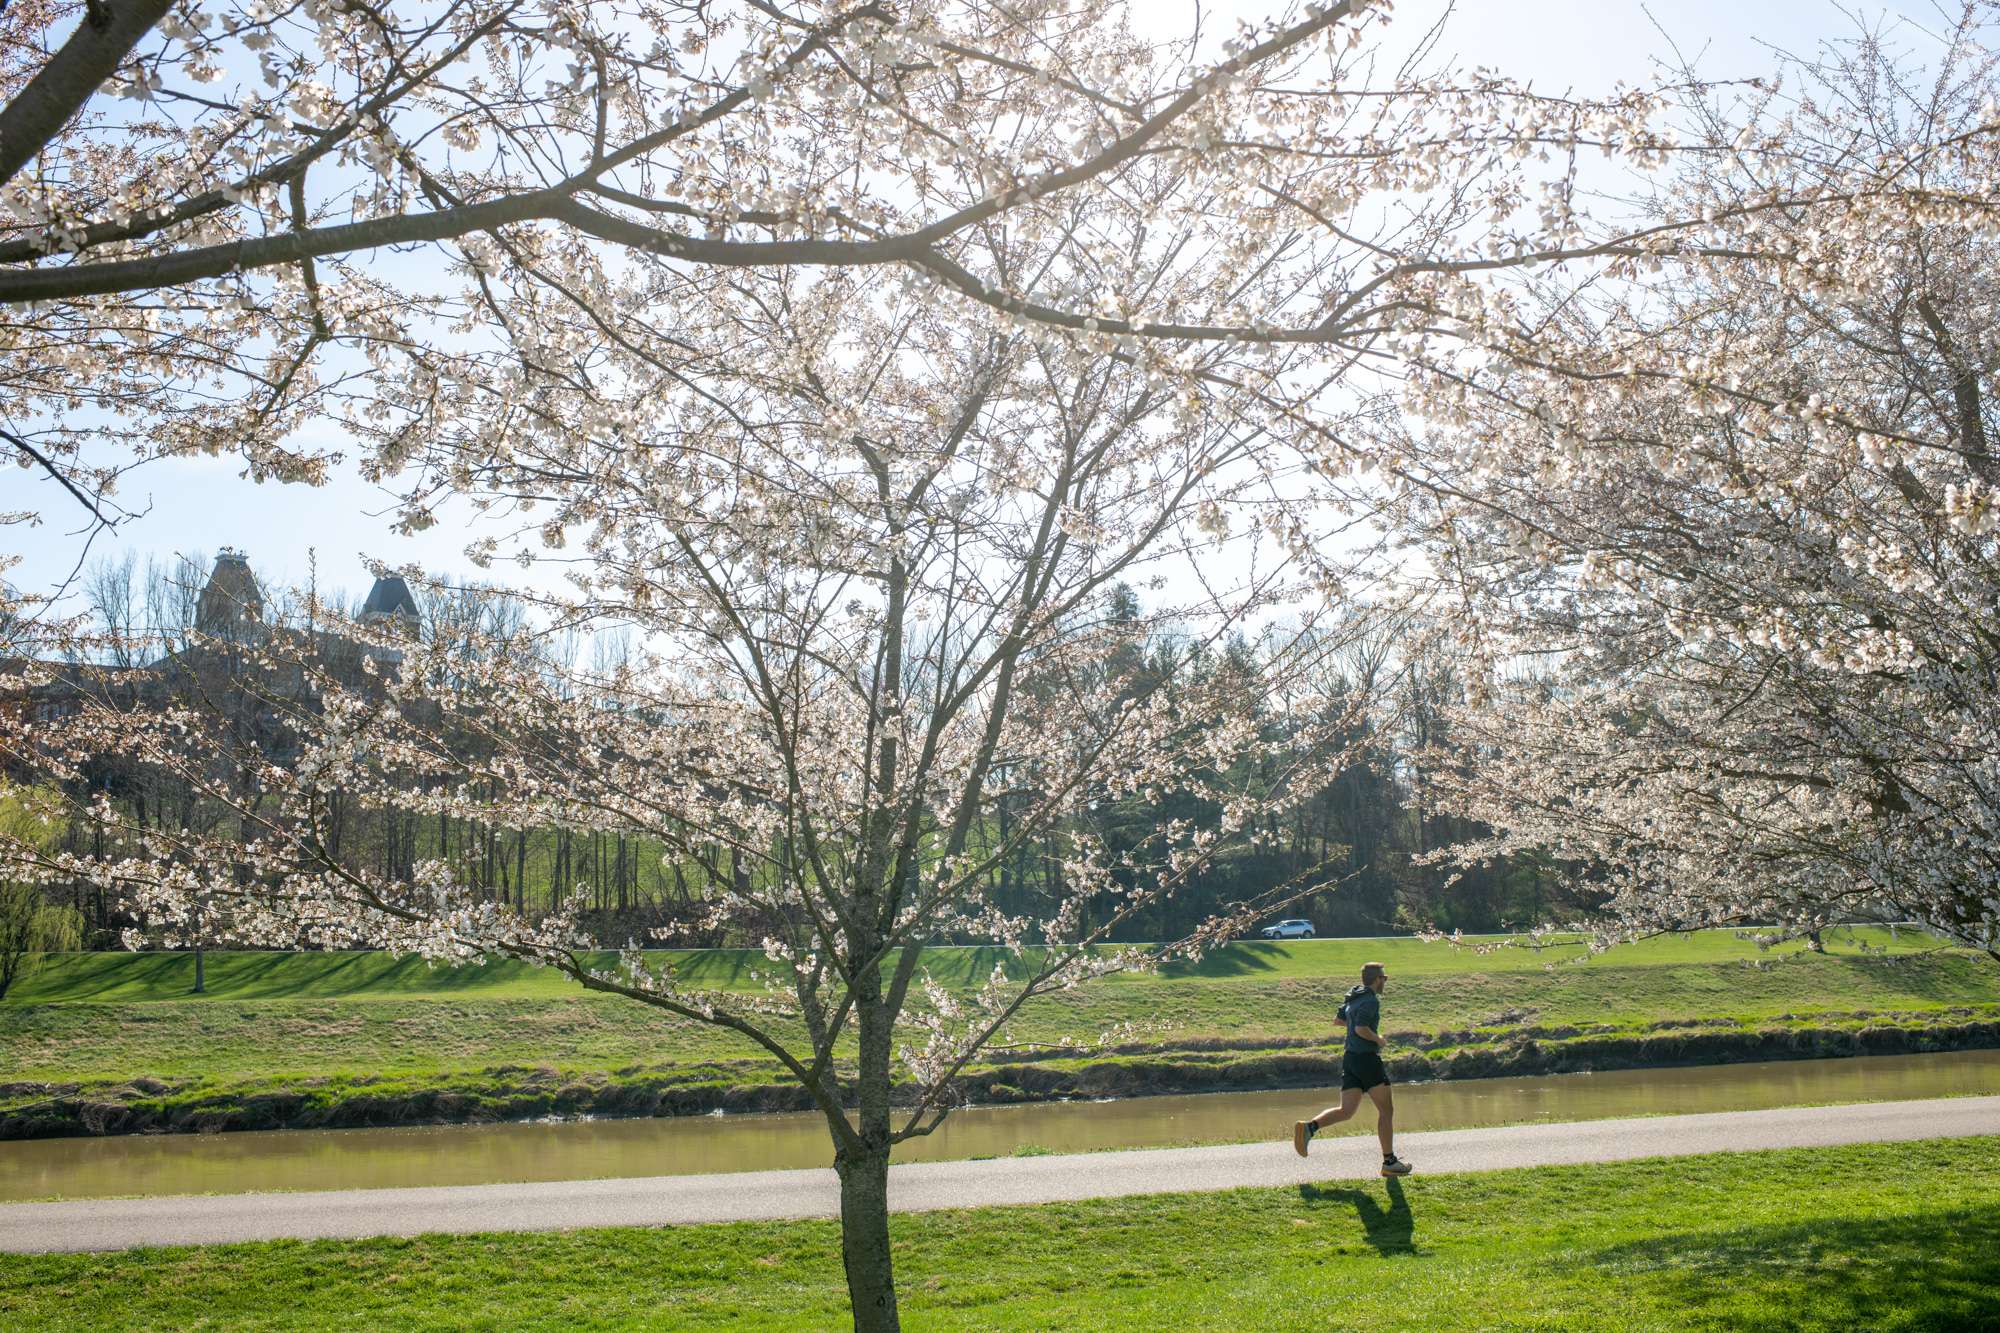 A runner passes along the Hocking River next to blooming Cherry Blossom trees